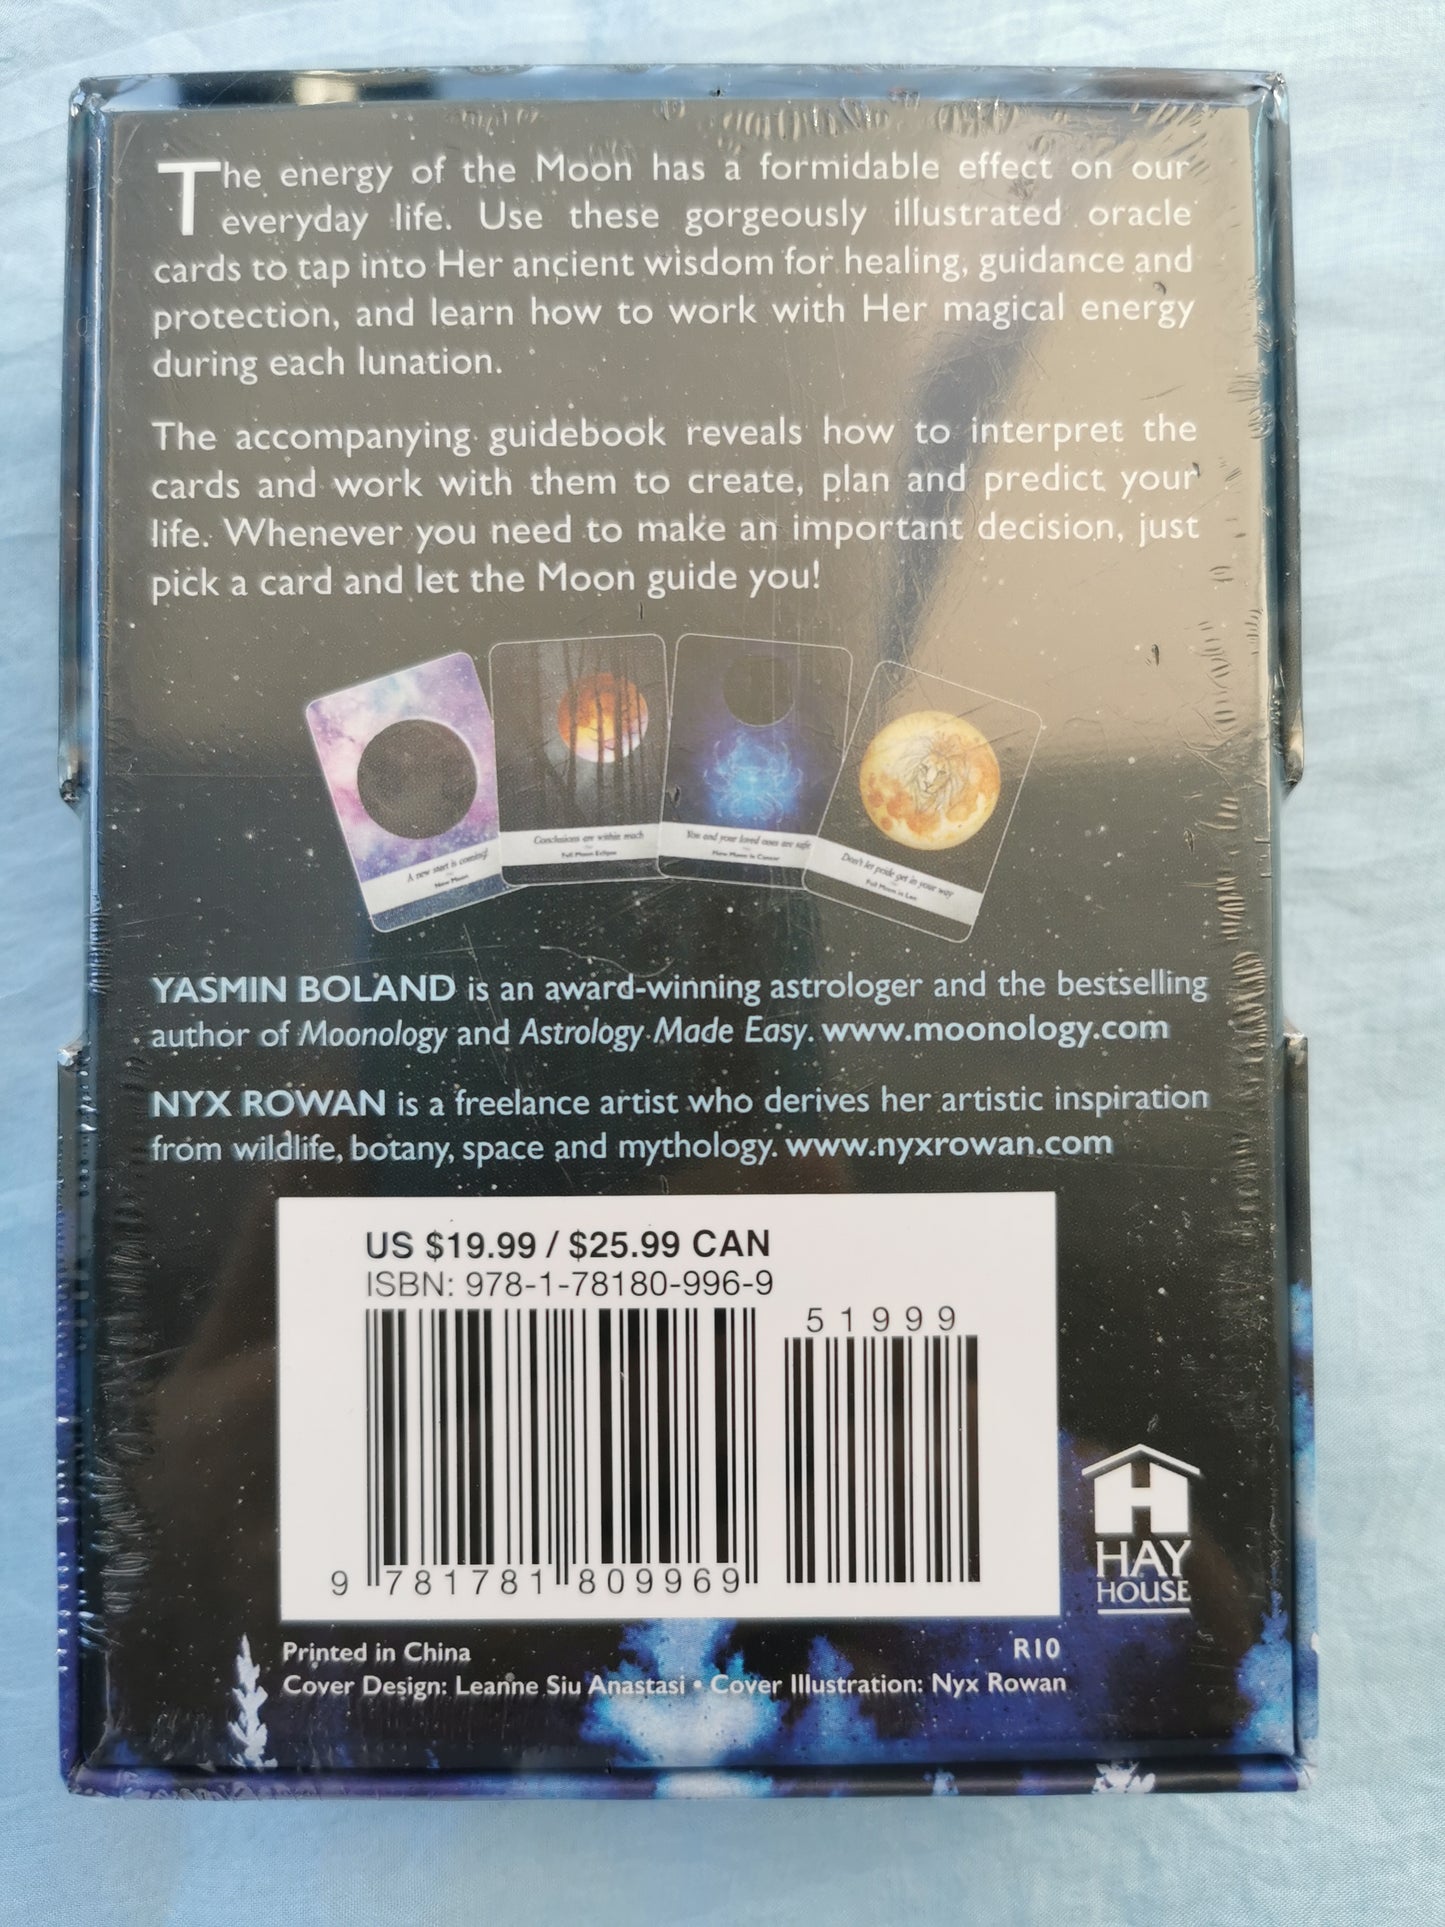 Moonology Oracle Cards